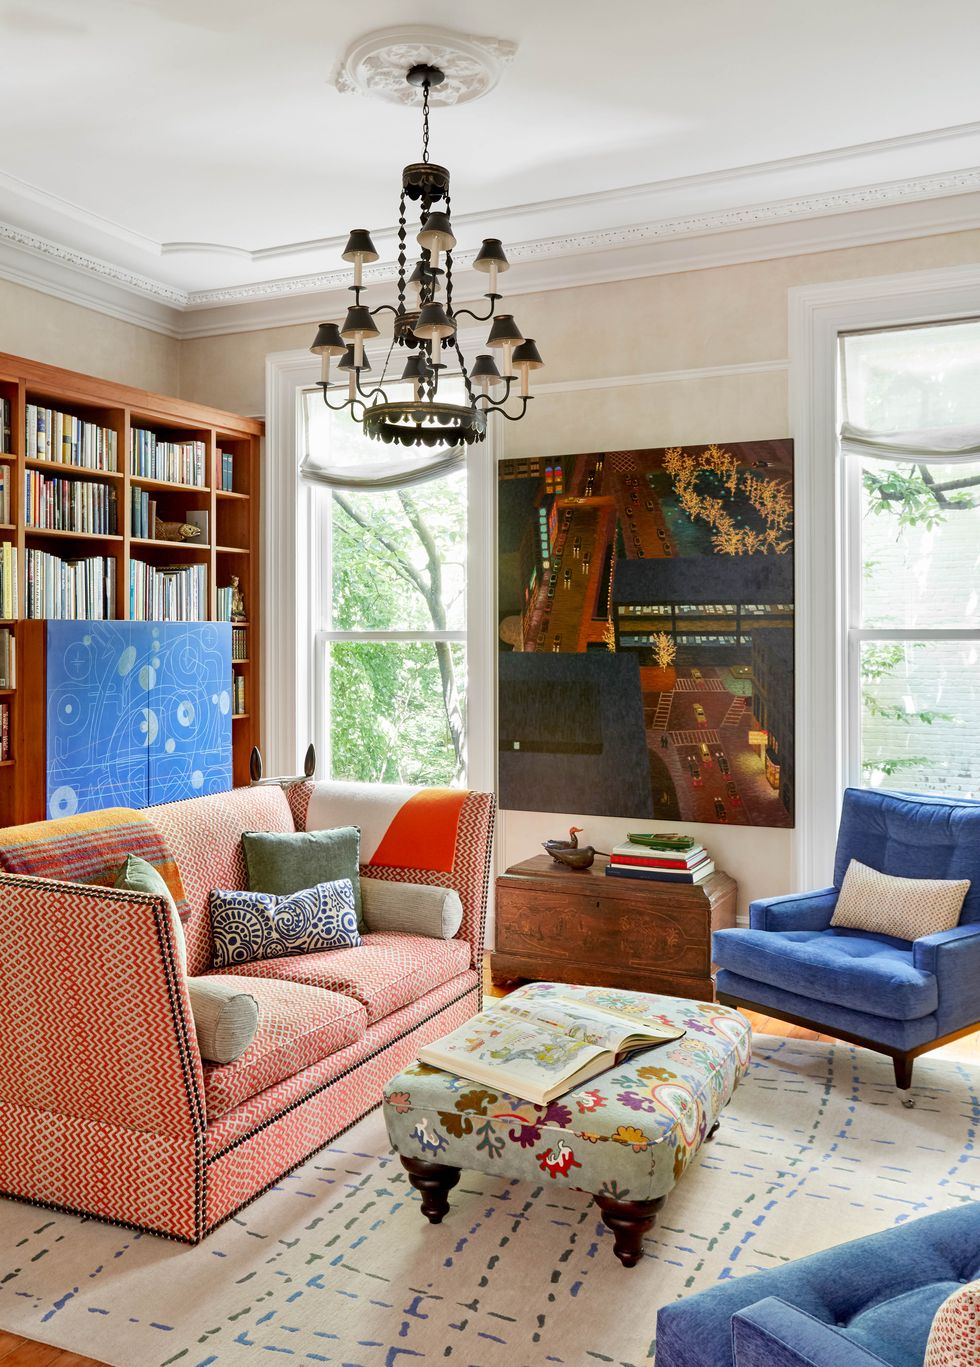 Kathleen Walsh Designs an Eclectic Townhouse Inspired by an Art Collection